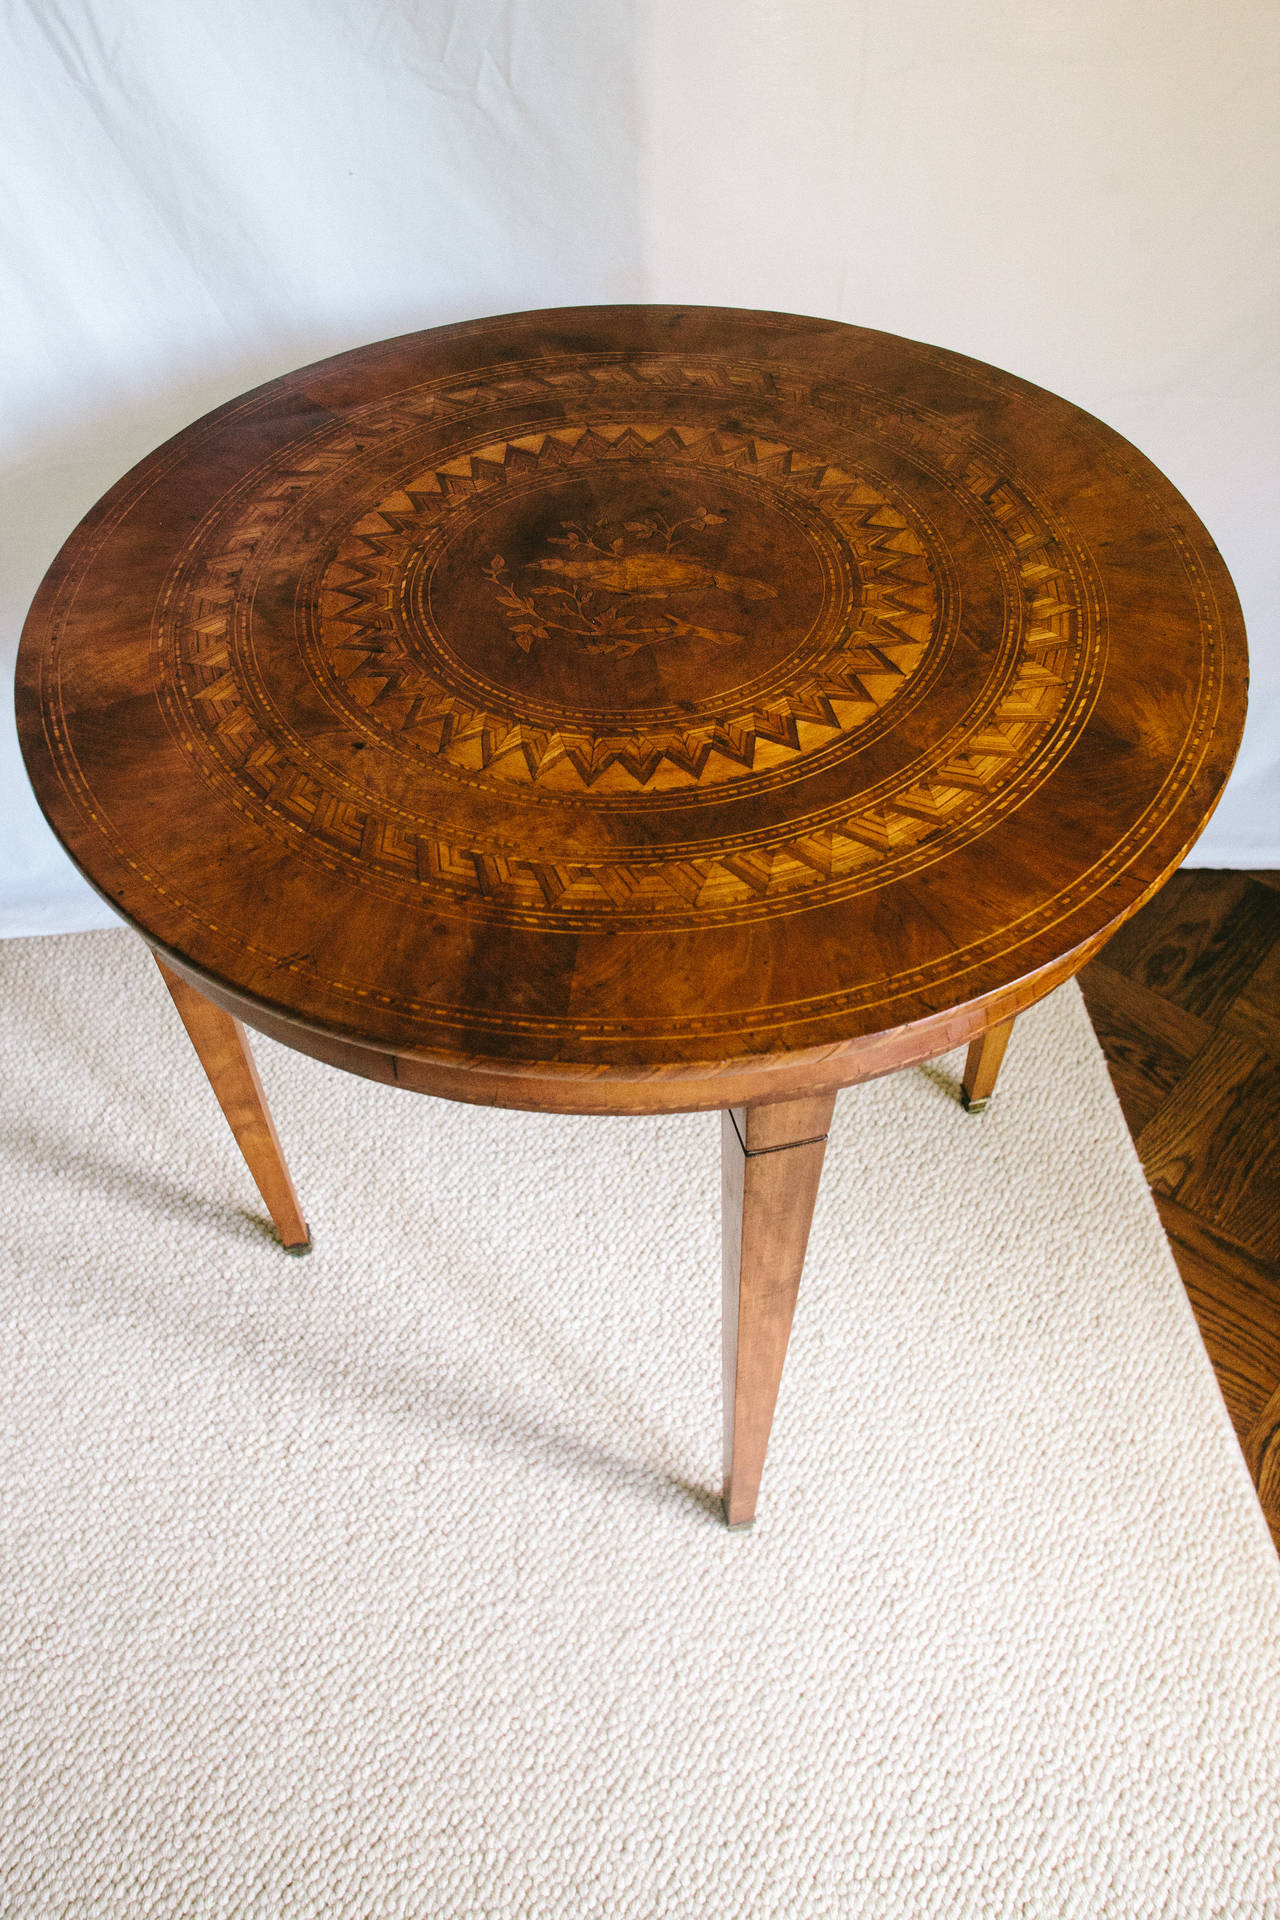 19th Century Continental Walnut Marquetry Table with Center Bird Motif 3